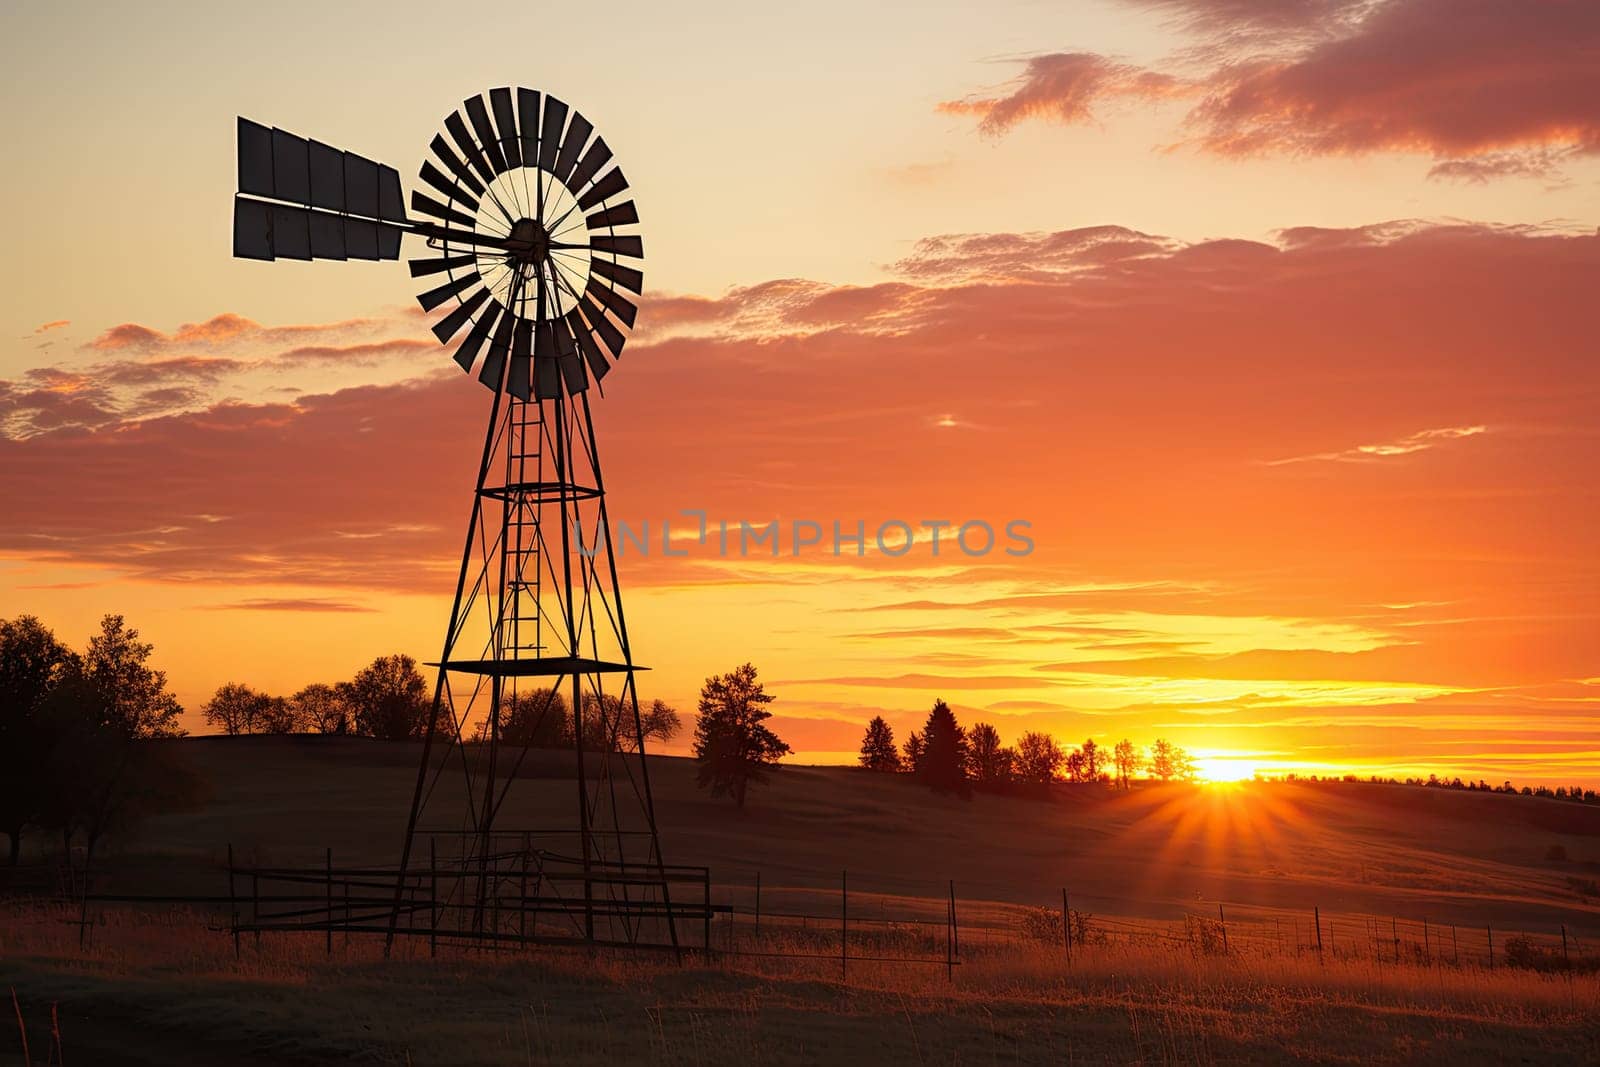 the sun setting behind a windmill in an open field with trees and grass on either side of the windmill is silhouetted by the